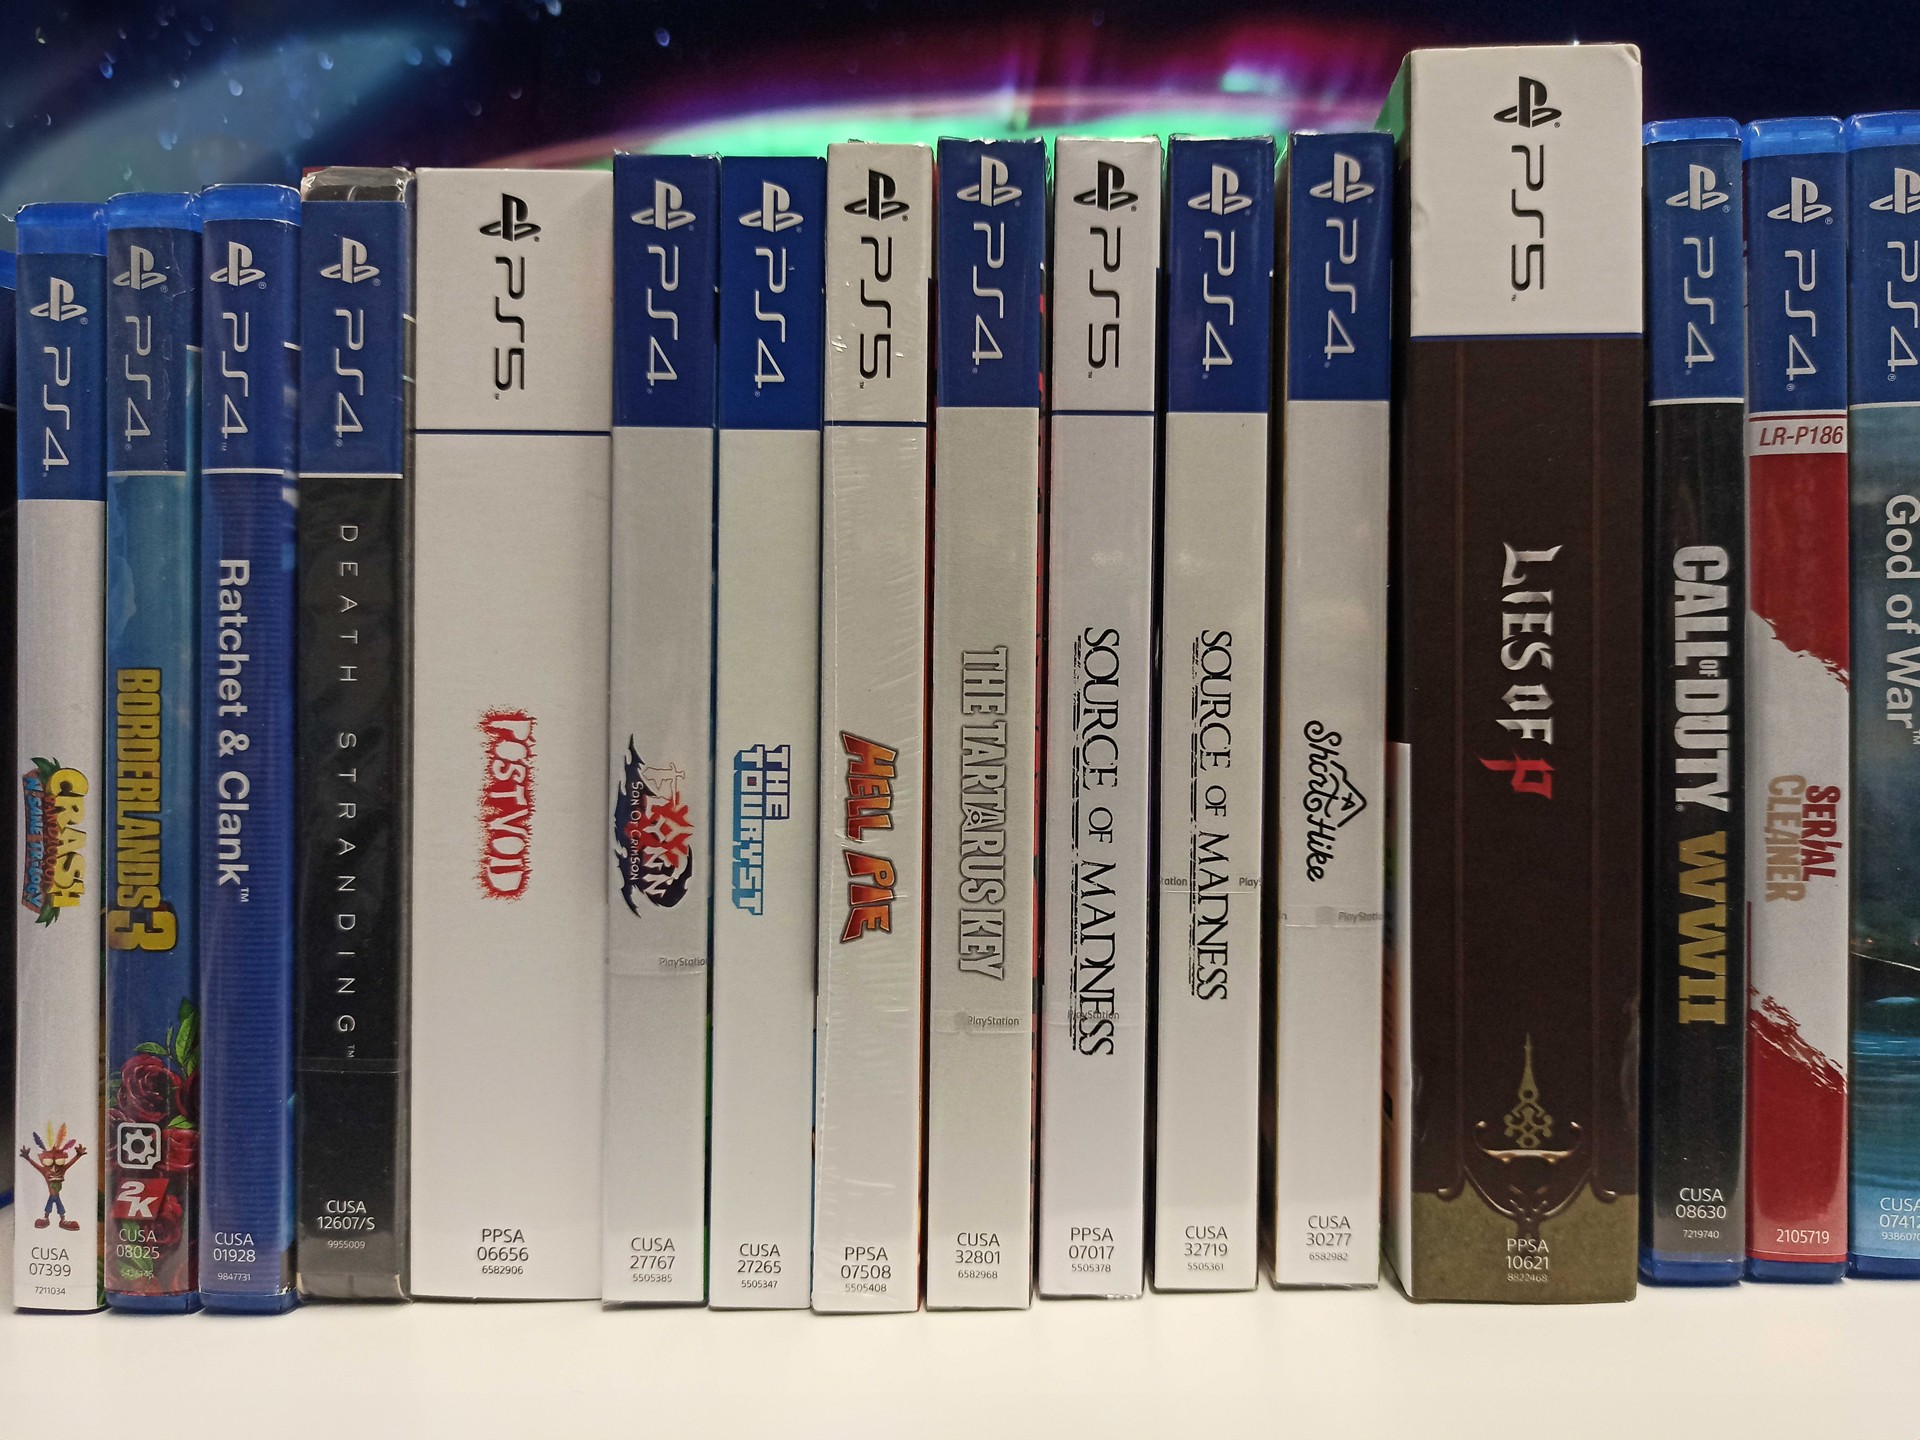 PlayStation Photo of Multiple Spines